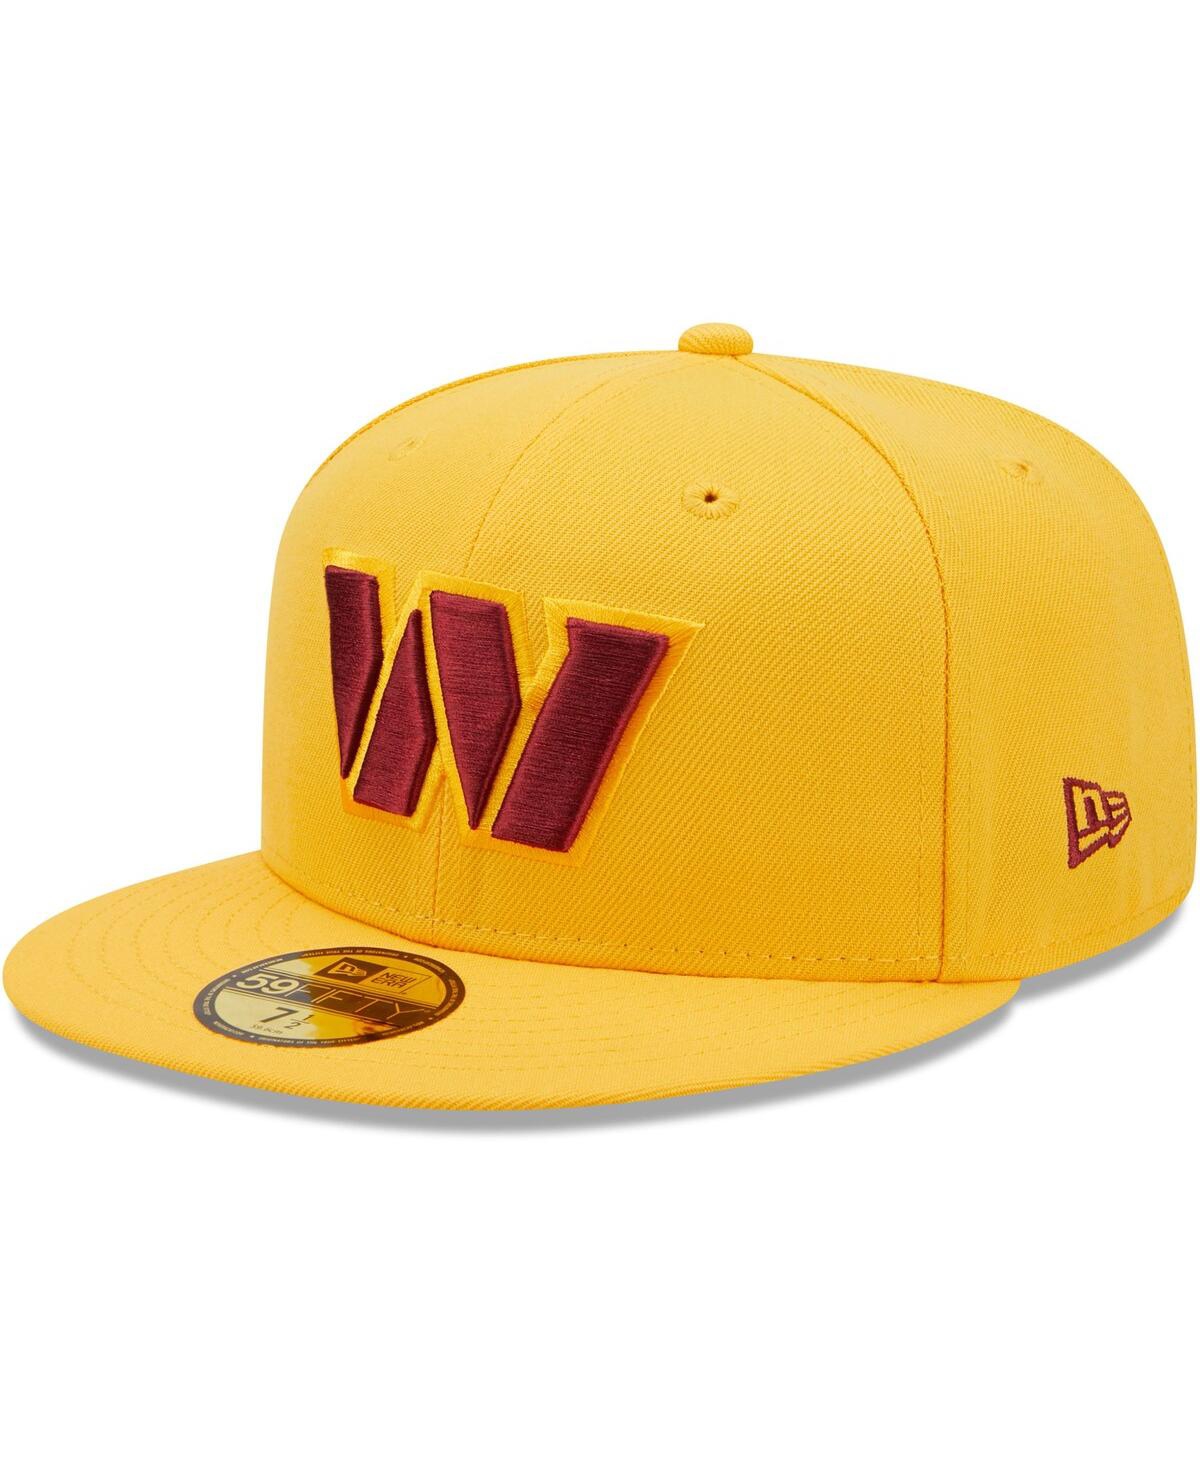 Shop New Era Men's  Gold Washington Commanders Omaha 59fifty Fitted Hat